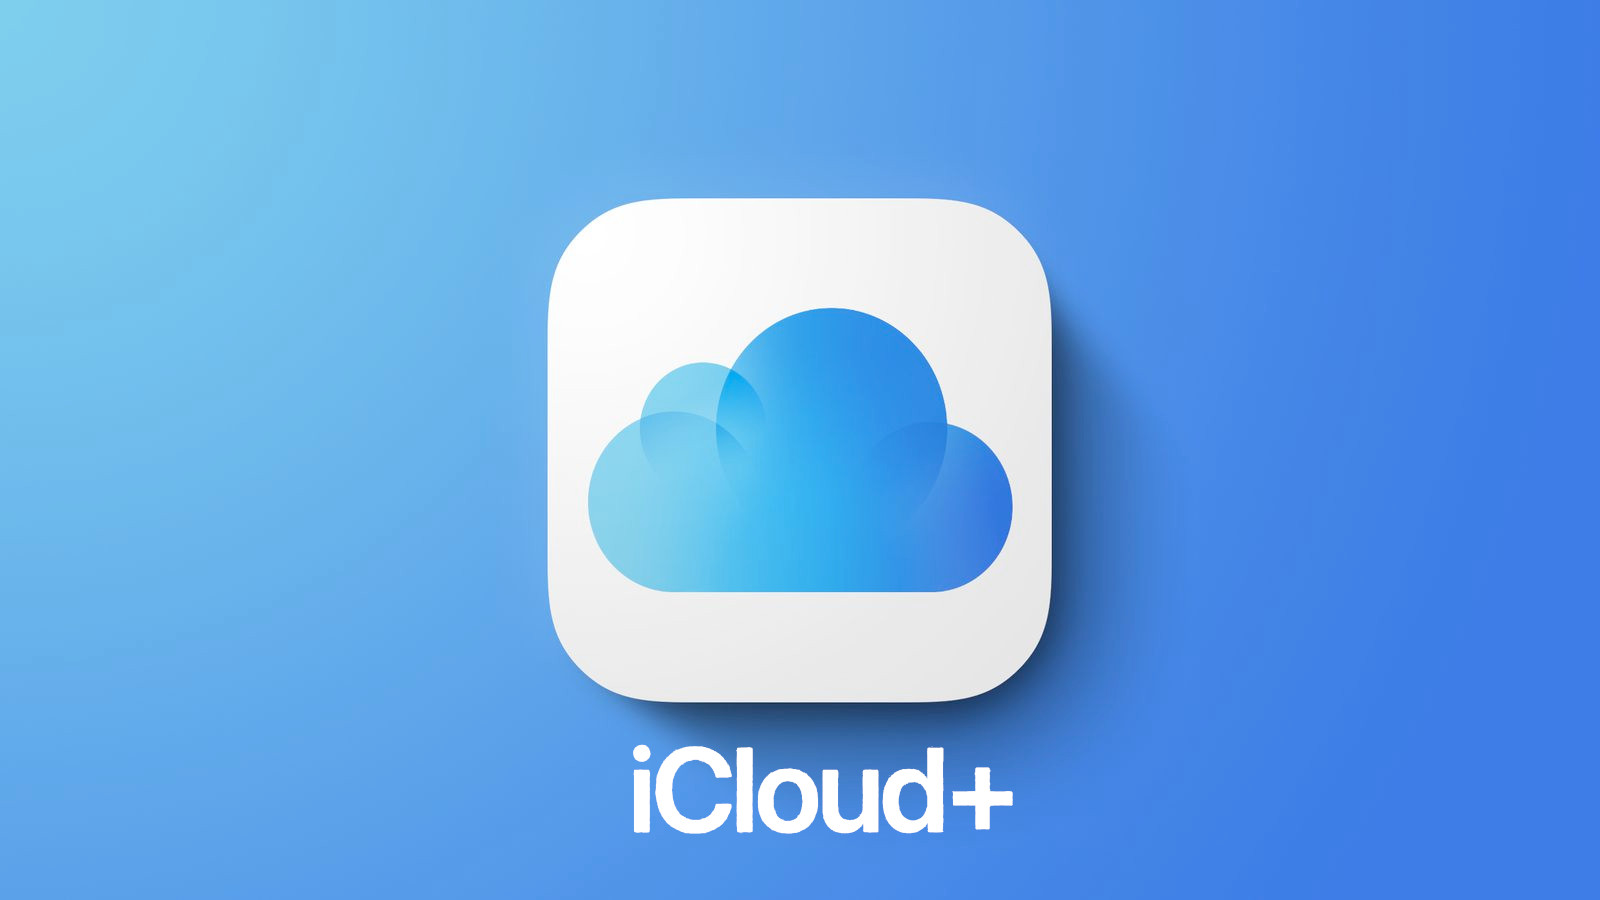 iCloud+ 50GB - 3 Months Trial Subscription US (ONLY FOR NEW ACCOUNTS), 0.31 usd